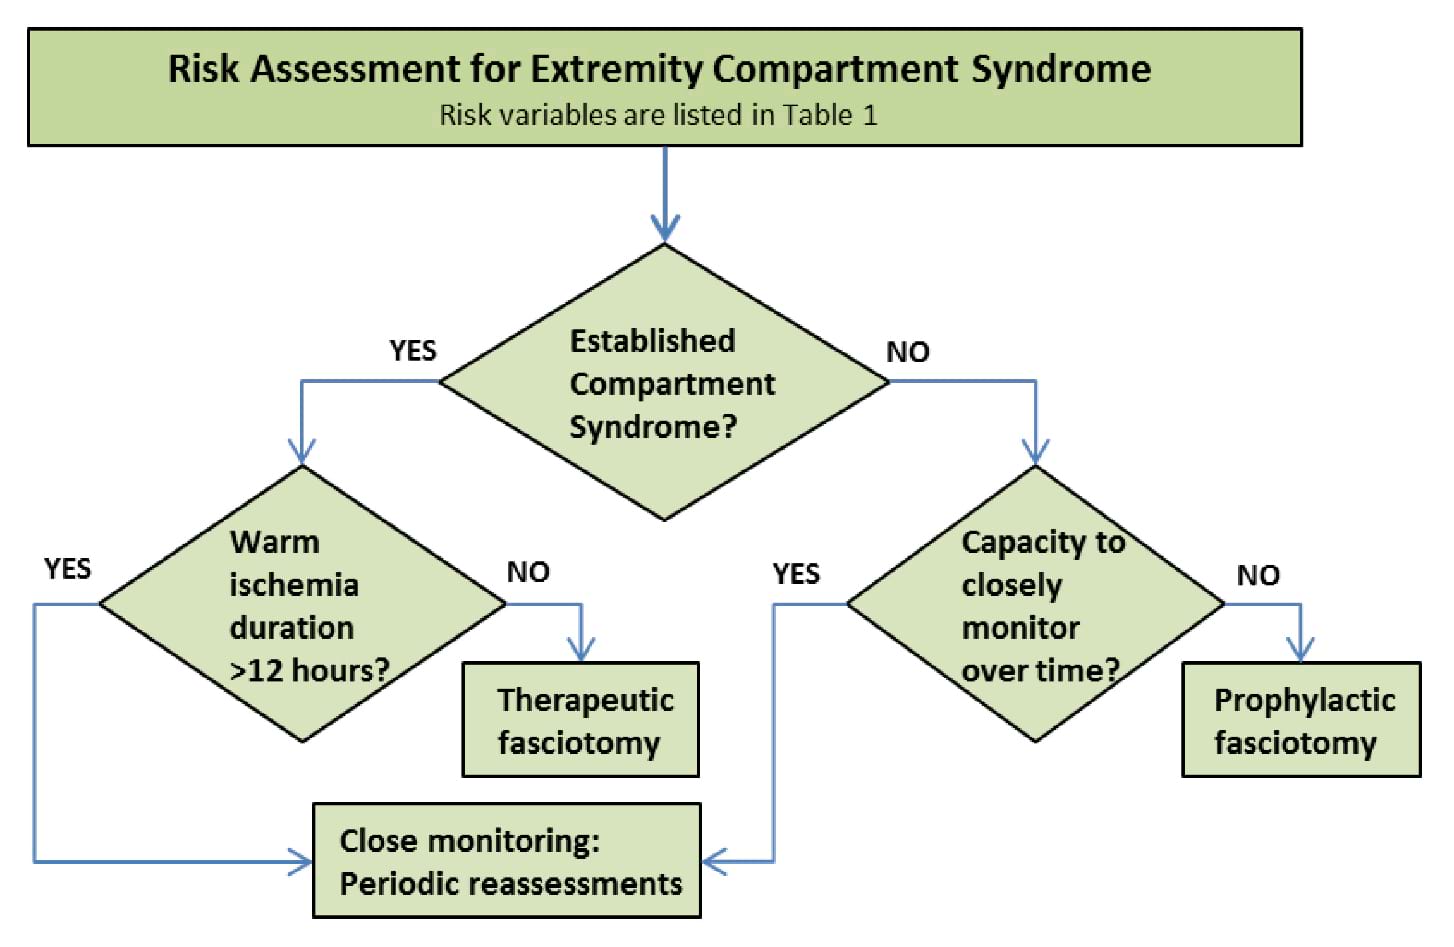 Algorithm For Clinical Decision Making on Compartment